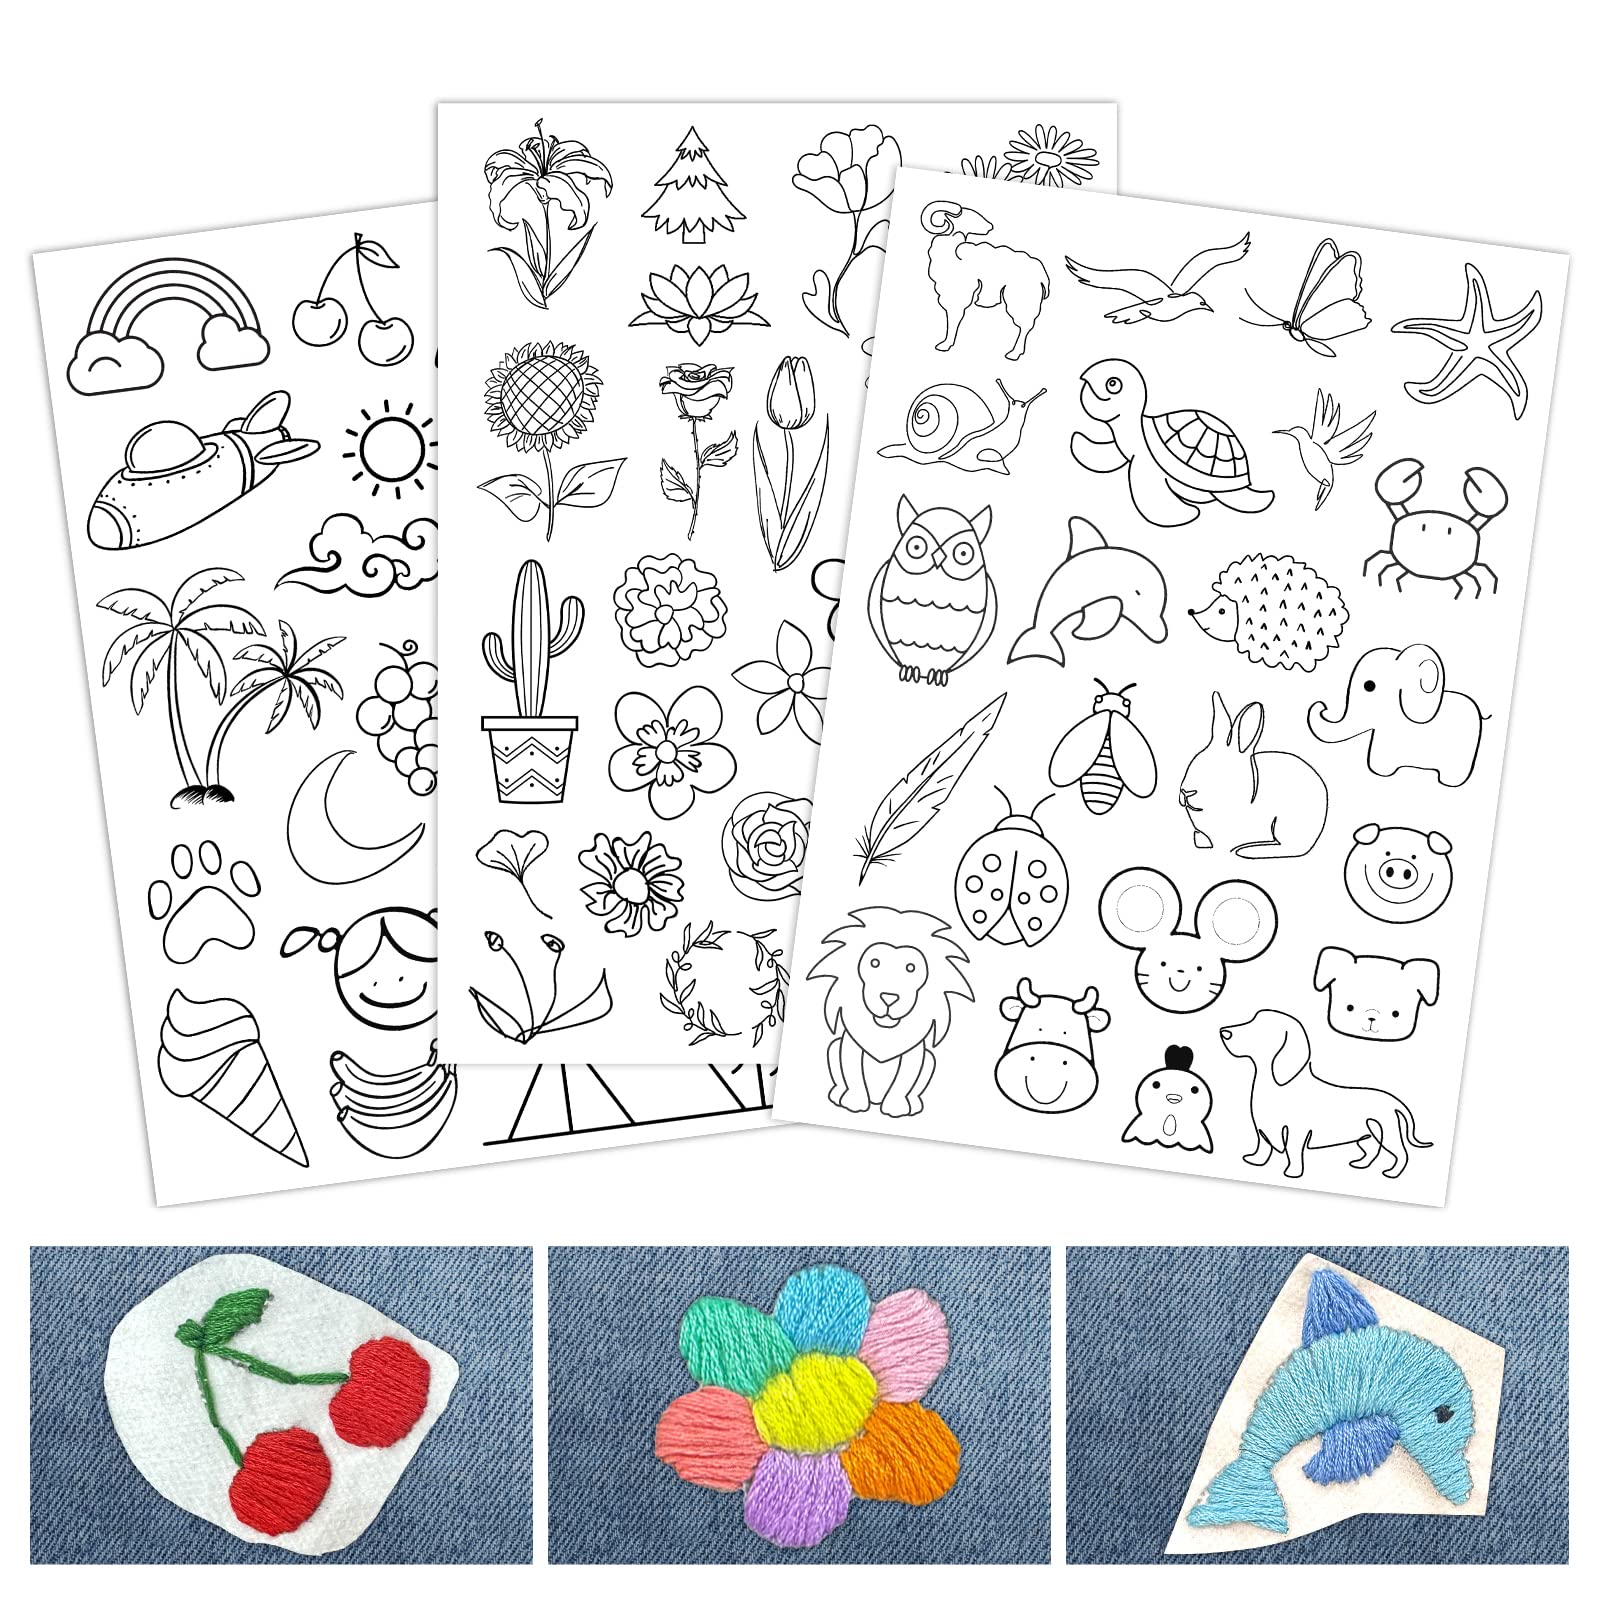  52 Pcs Water Soluble Stabilizer for Embroidery Patterns, Stick  and Stitch Embroidery Paper, Wash Away Embroidery Stabilizers with Letter  Pattern for Hand Sewing Lover